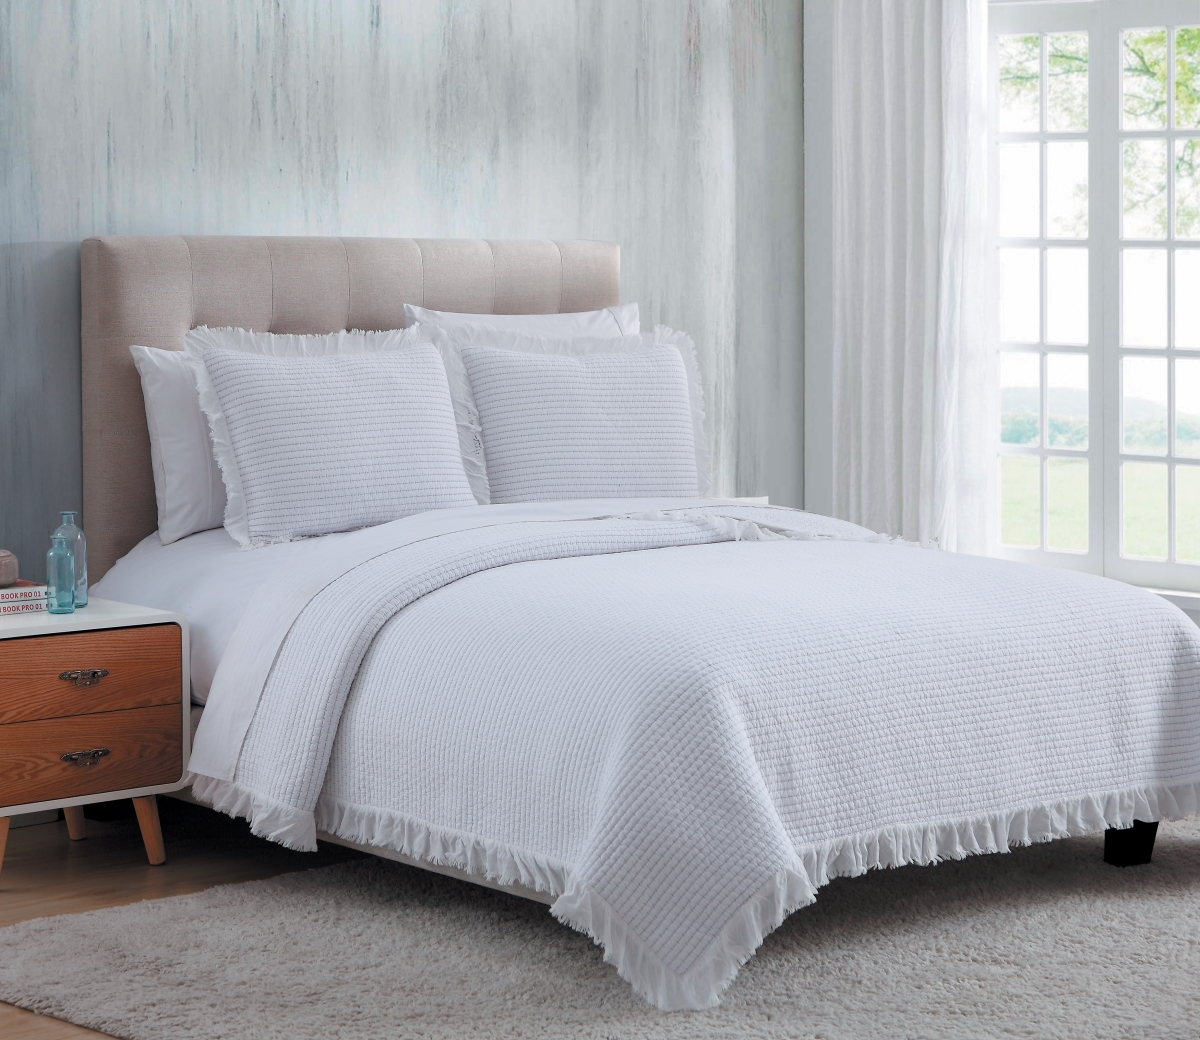 Q170.w9090 Beautiful Cotton Quilt Set With Textured Design & Fringed Borders, White